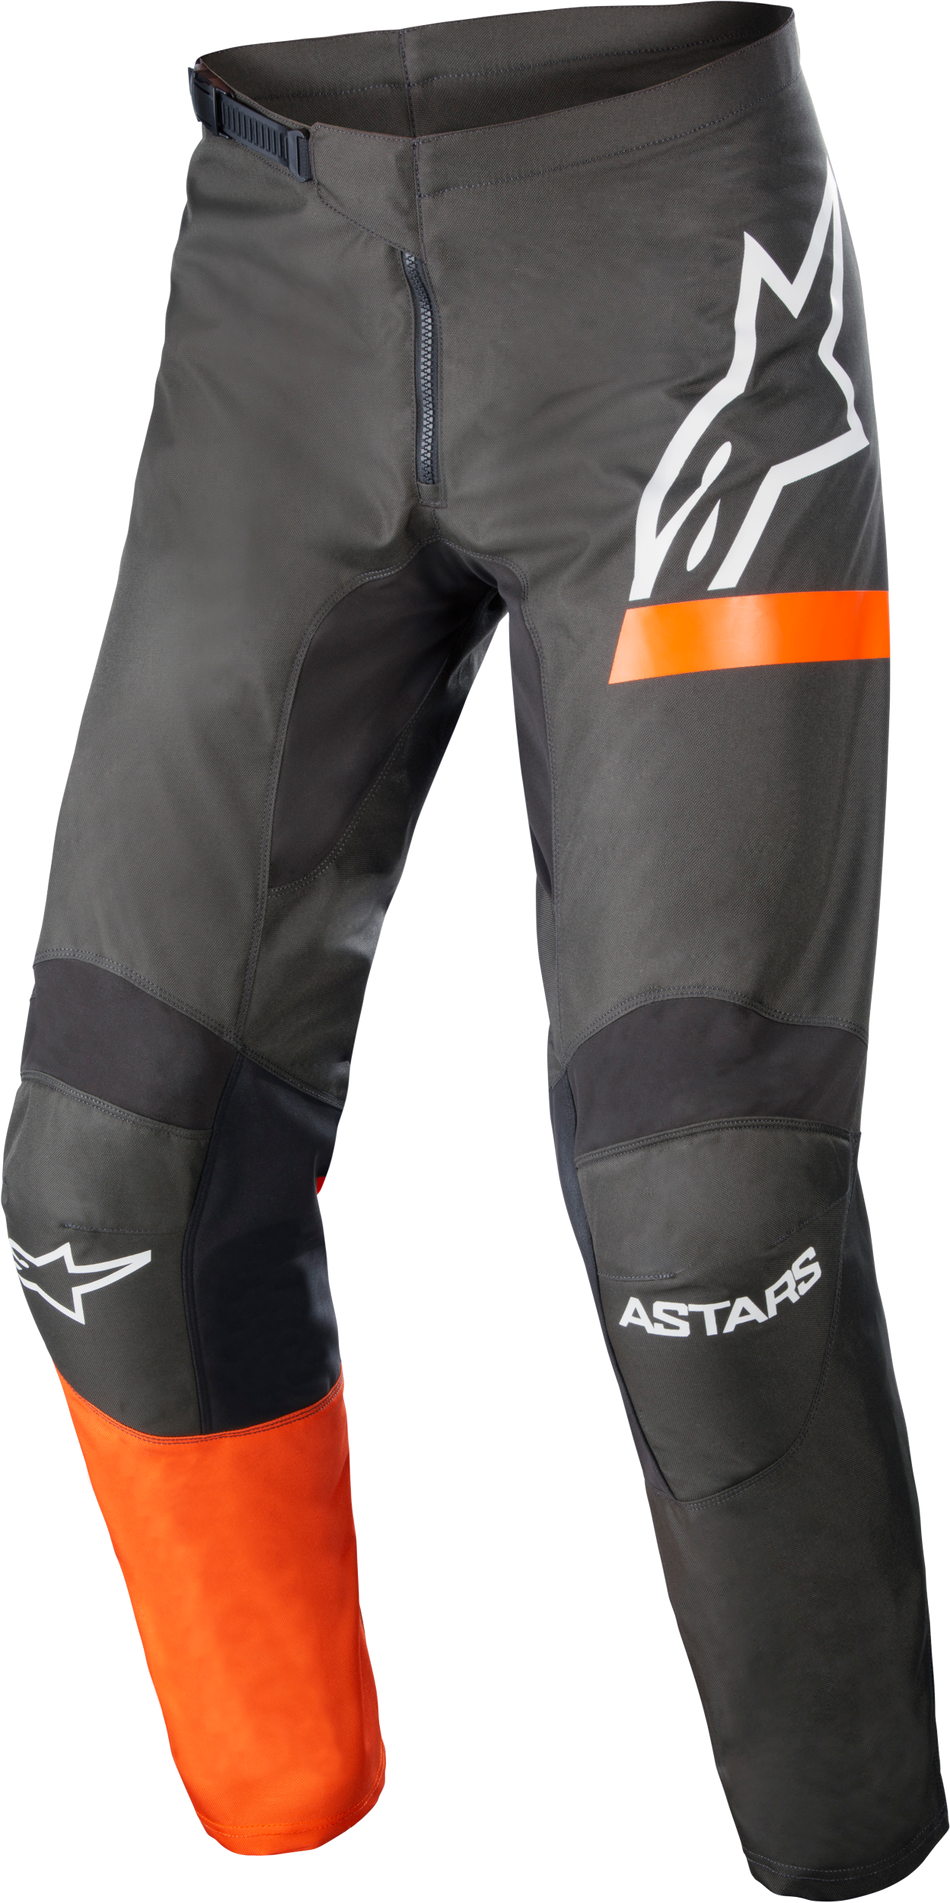 ALPINESTARS Fluid Chaser Pants Anthracite/Coral Fluo Sz 32 3722422-1794-32